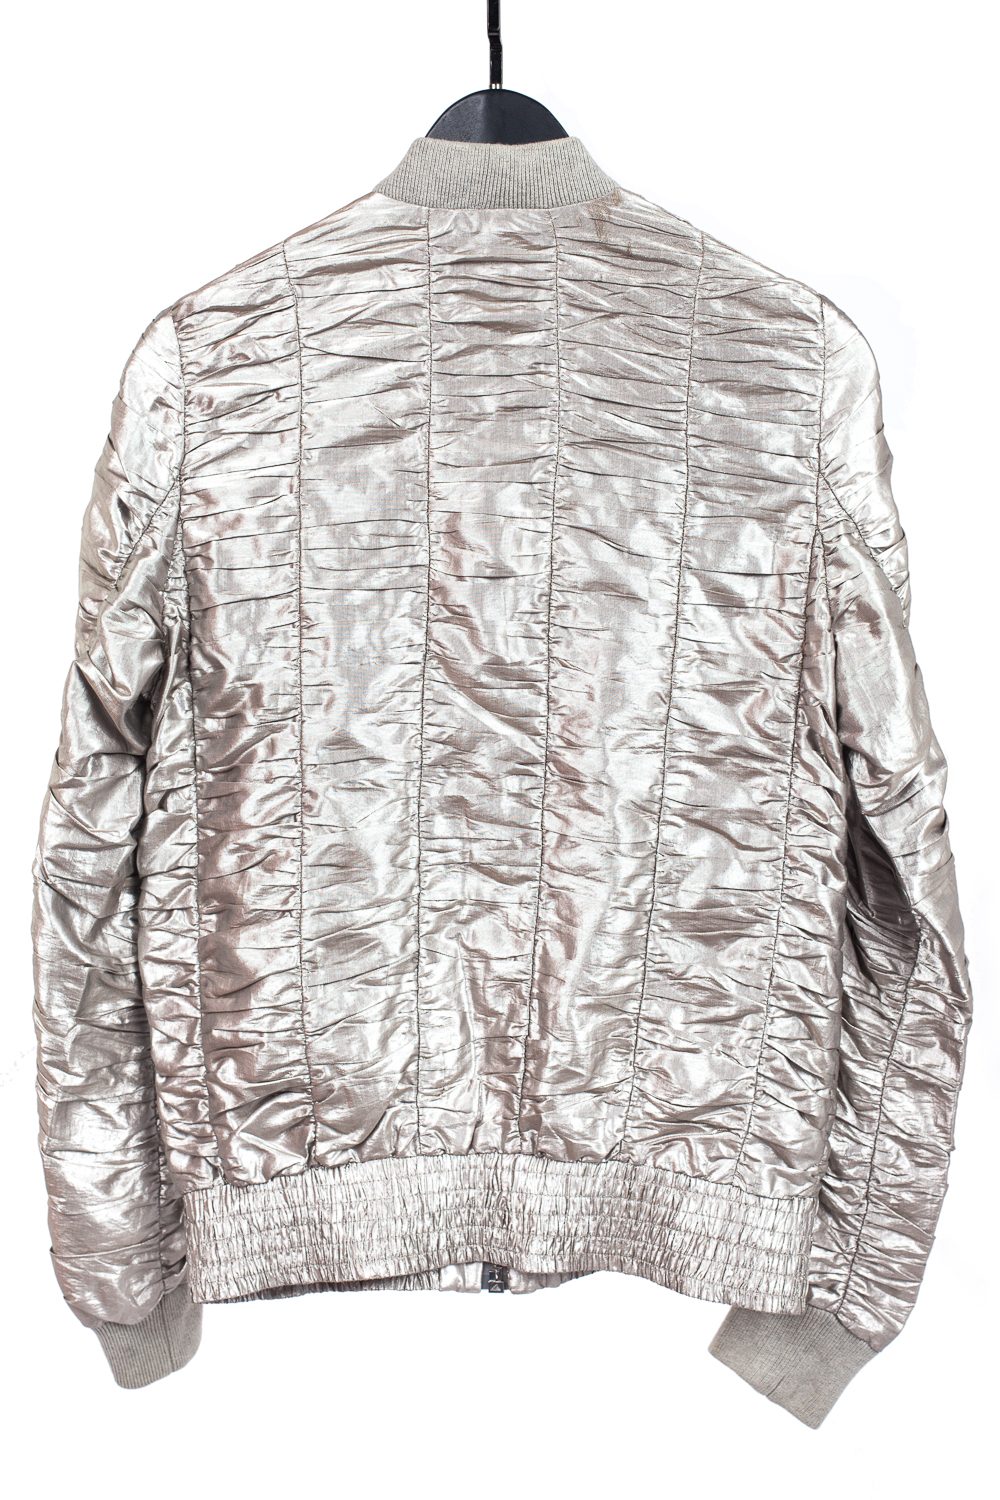 SS07 “We Look Good Together” Shirred Silver Bomber